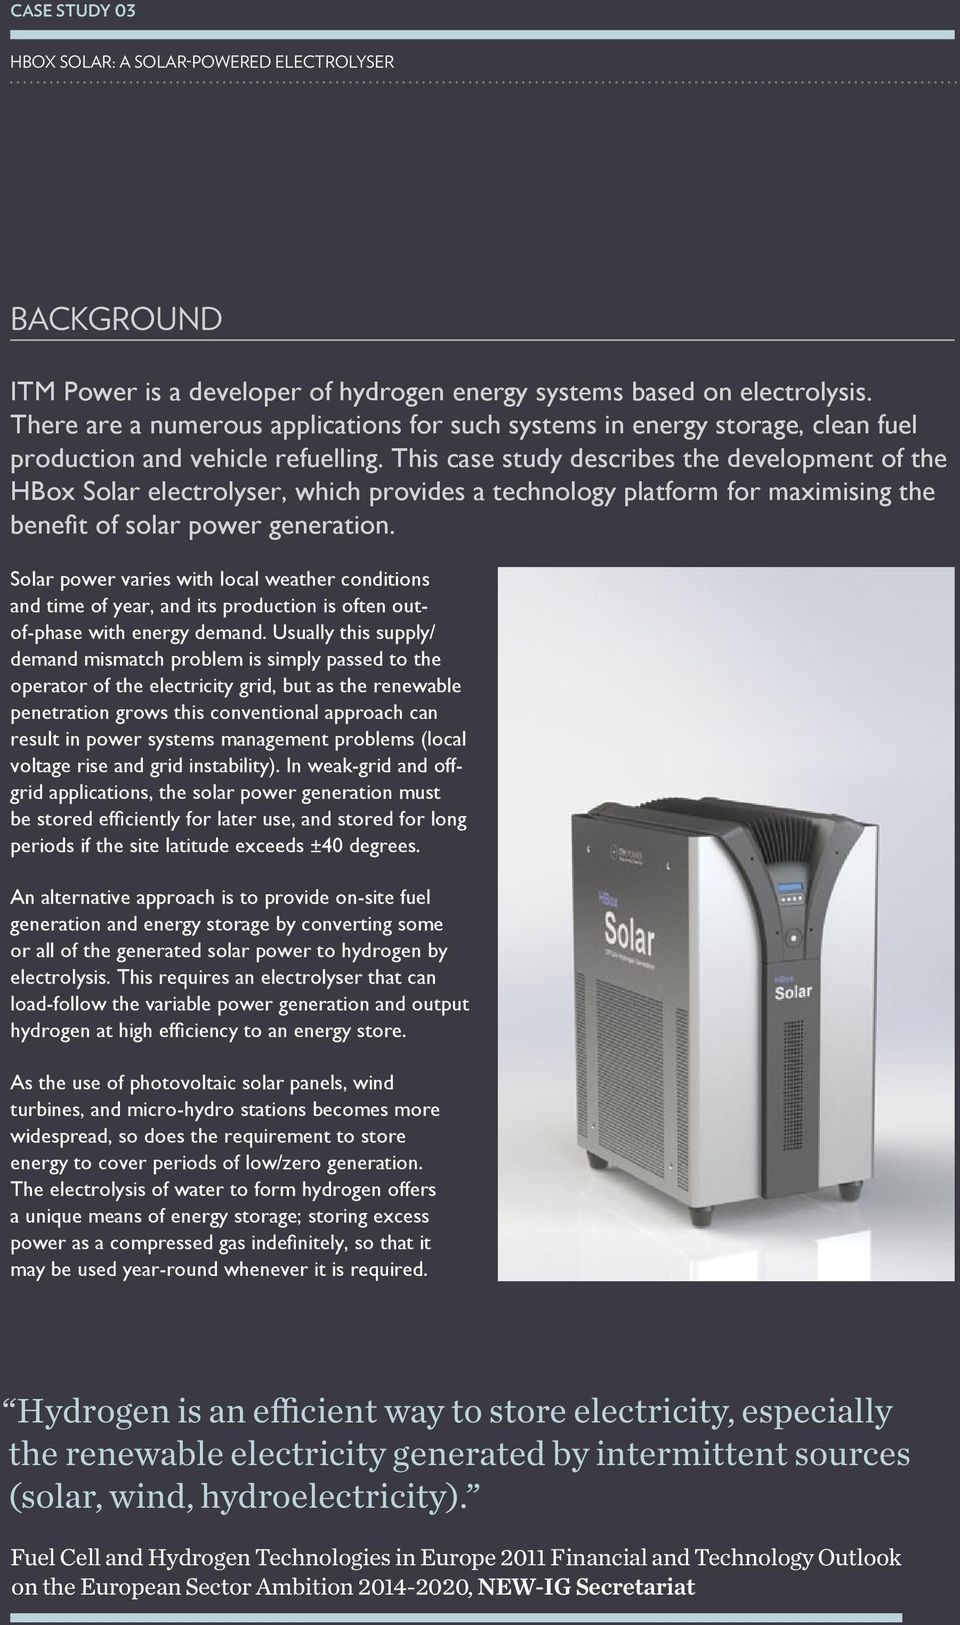 This case study describes the development of the HBox Solar electrolyser, which provides a technology platform for maximising the benefit of solar power generation.